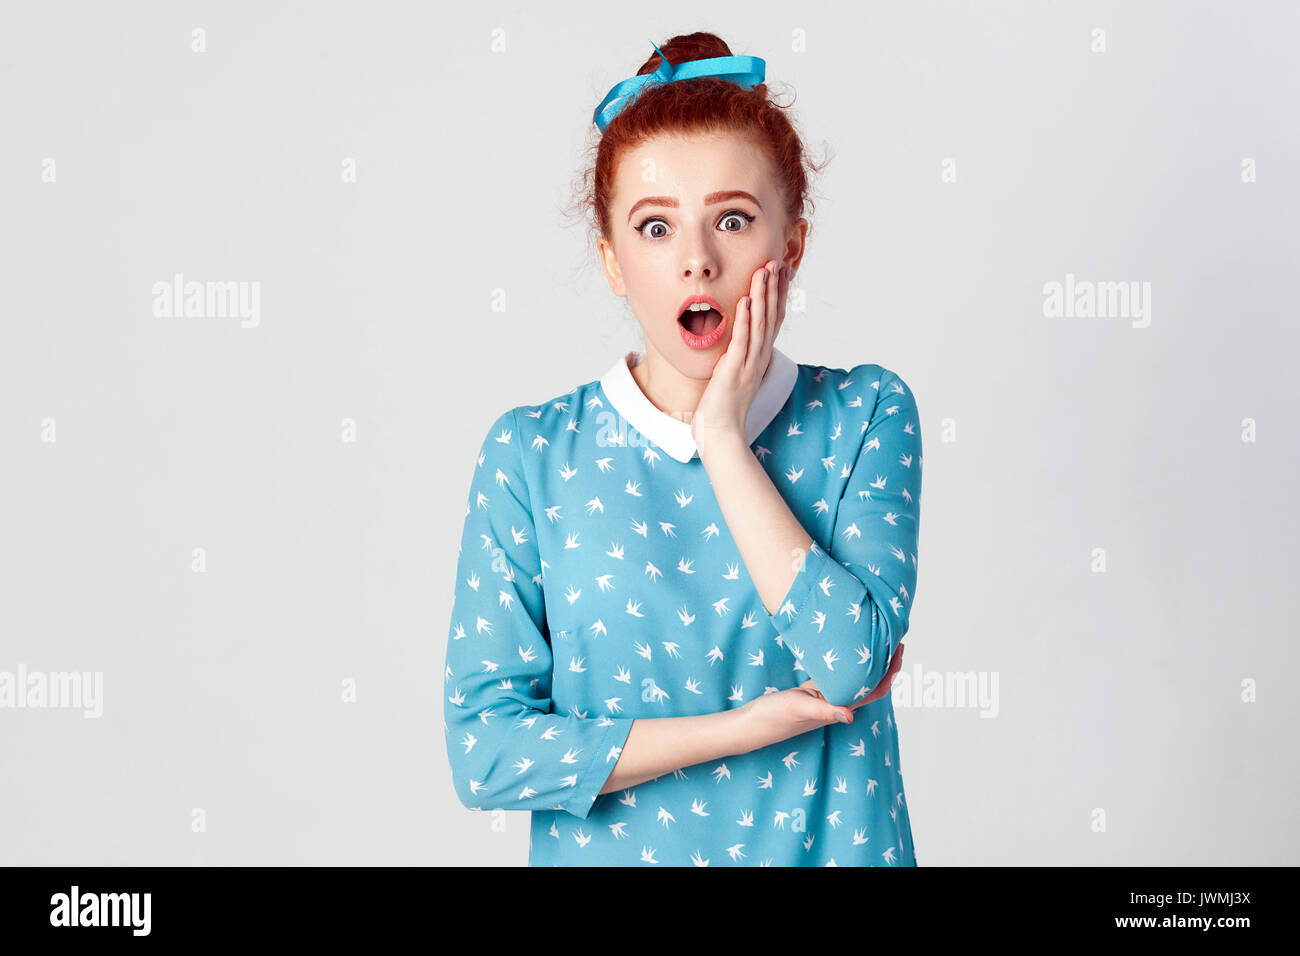 Ginger young girl screaming with shock, holding hands on her cheeks. Isolated studio shot on gray background. Stock Photo